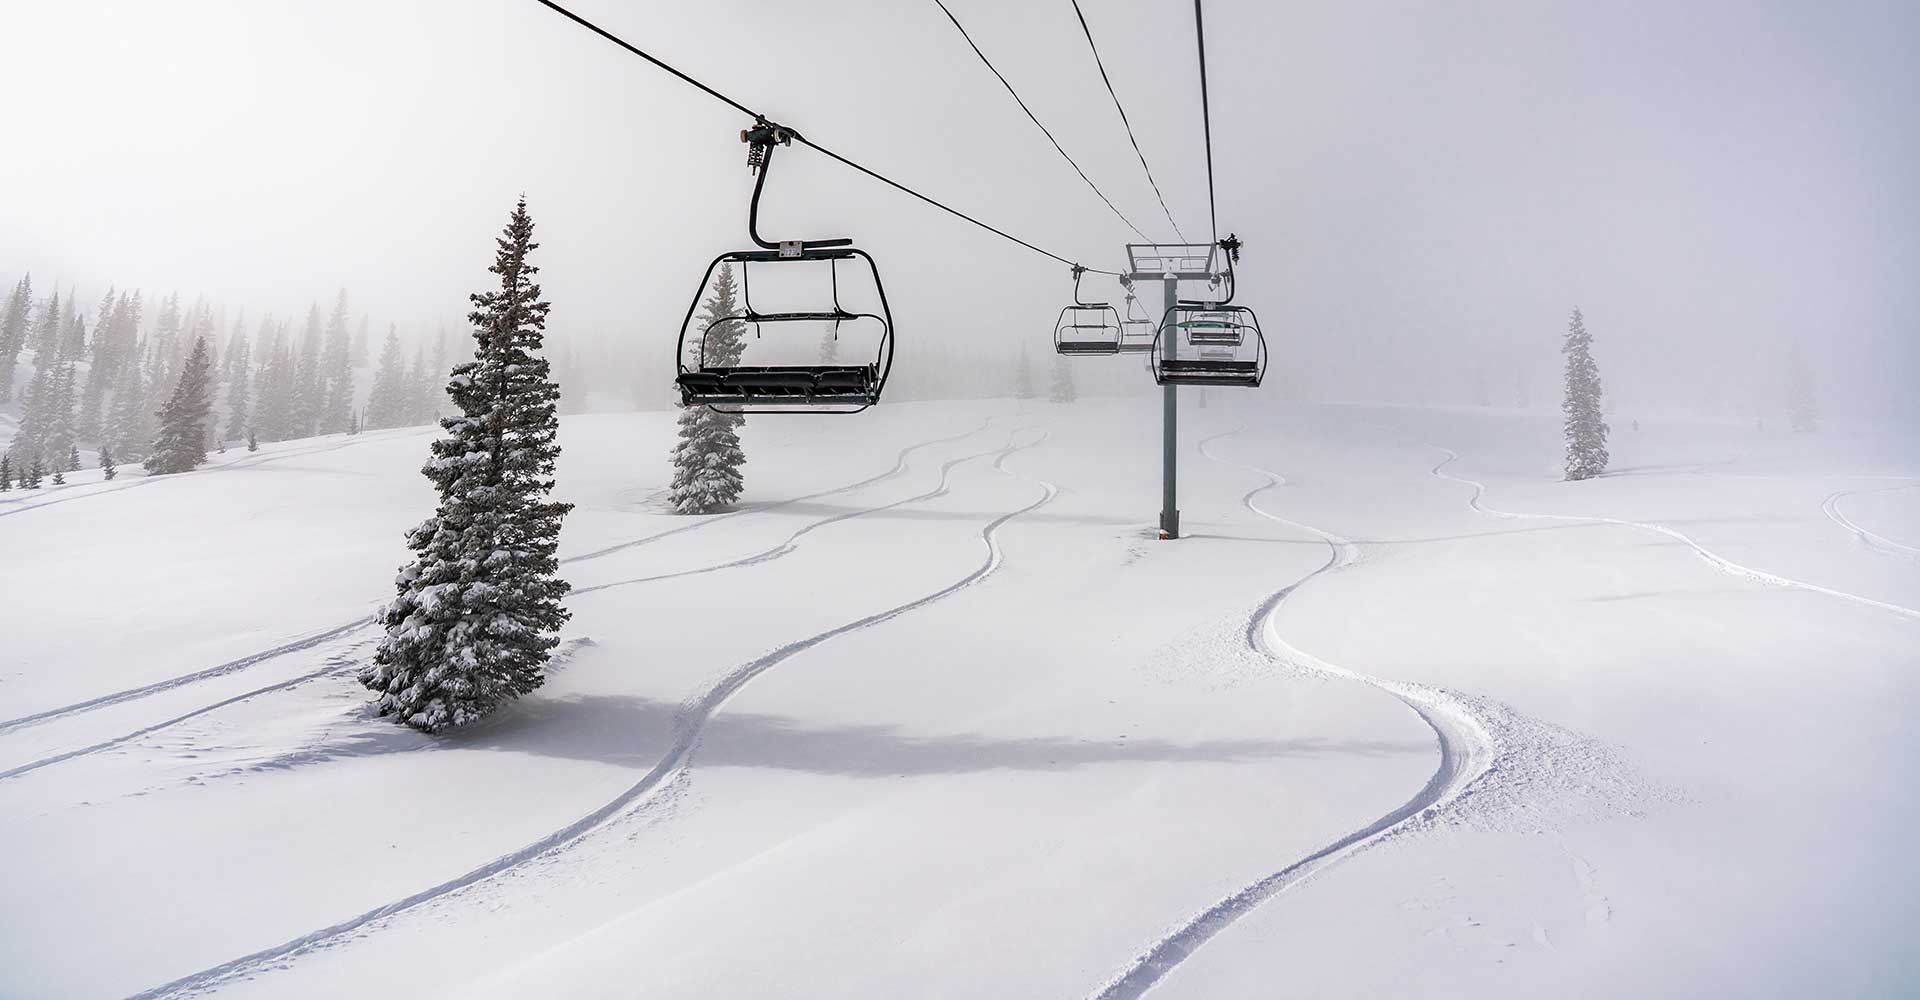 A powder day and empty lifts at Aspen Snowmass, Colorado